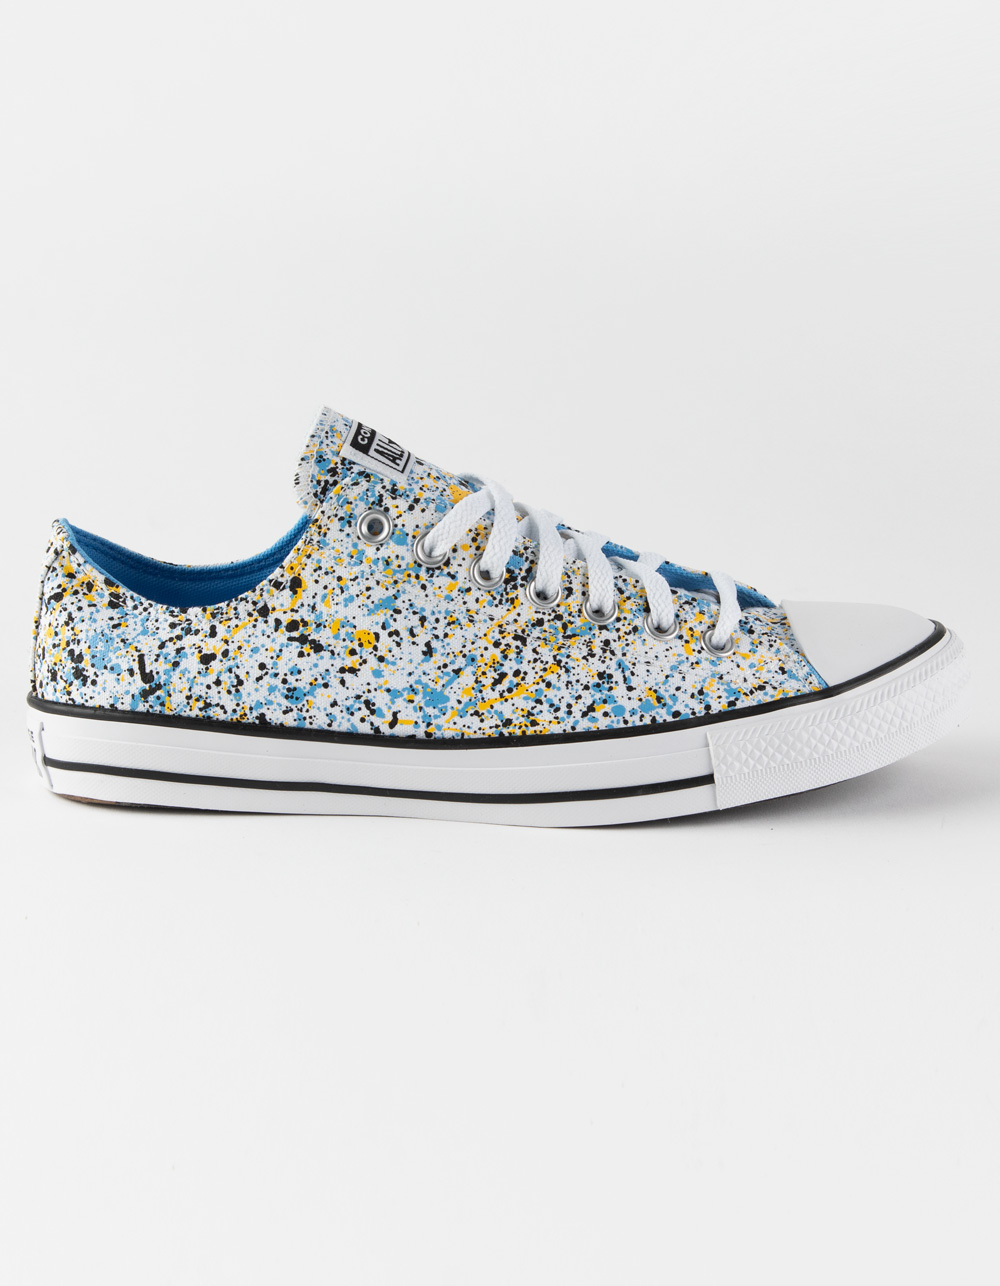 CONVERSE Chuck Taylor All Star Paint Splatter Low Top Shoes - MULTI ...